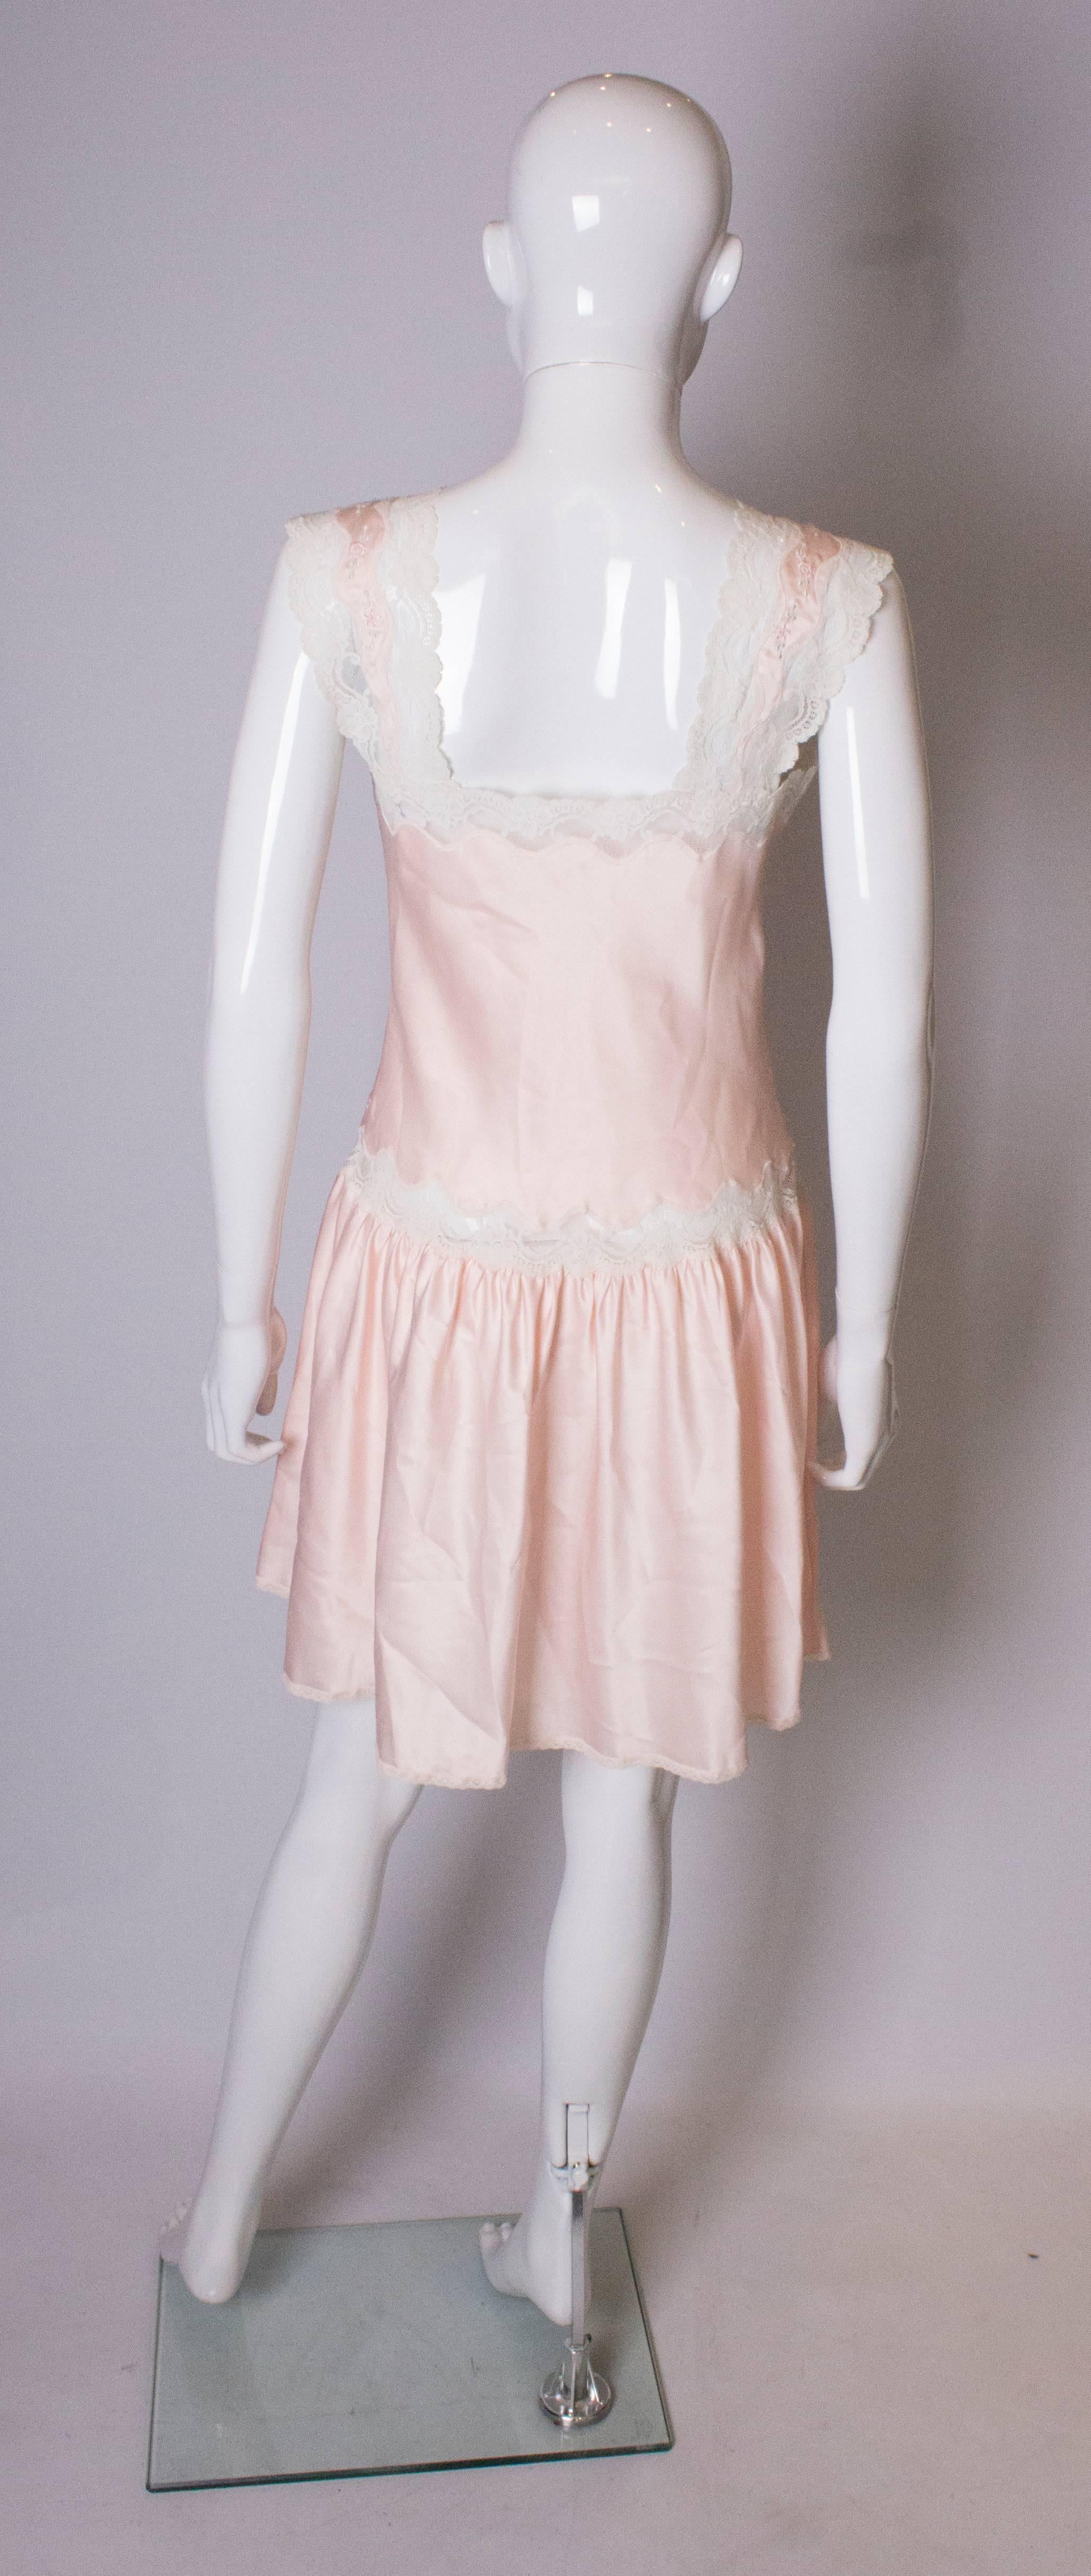 Vintage Pink Nightdress /Dress with Lace Detail 2